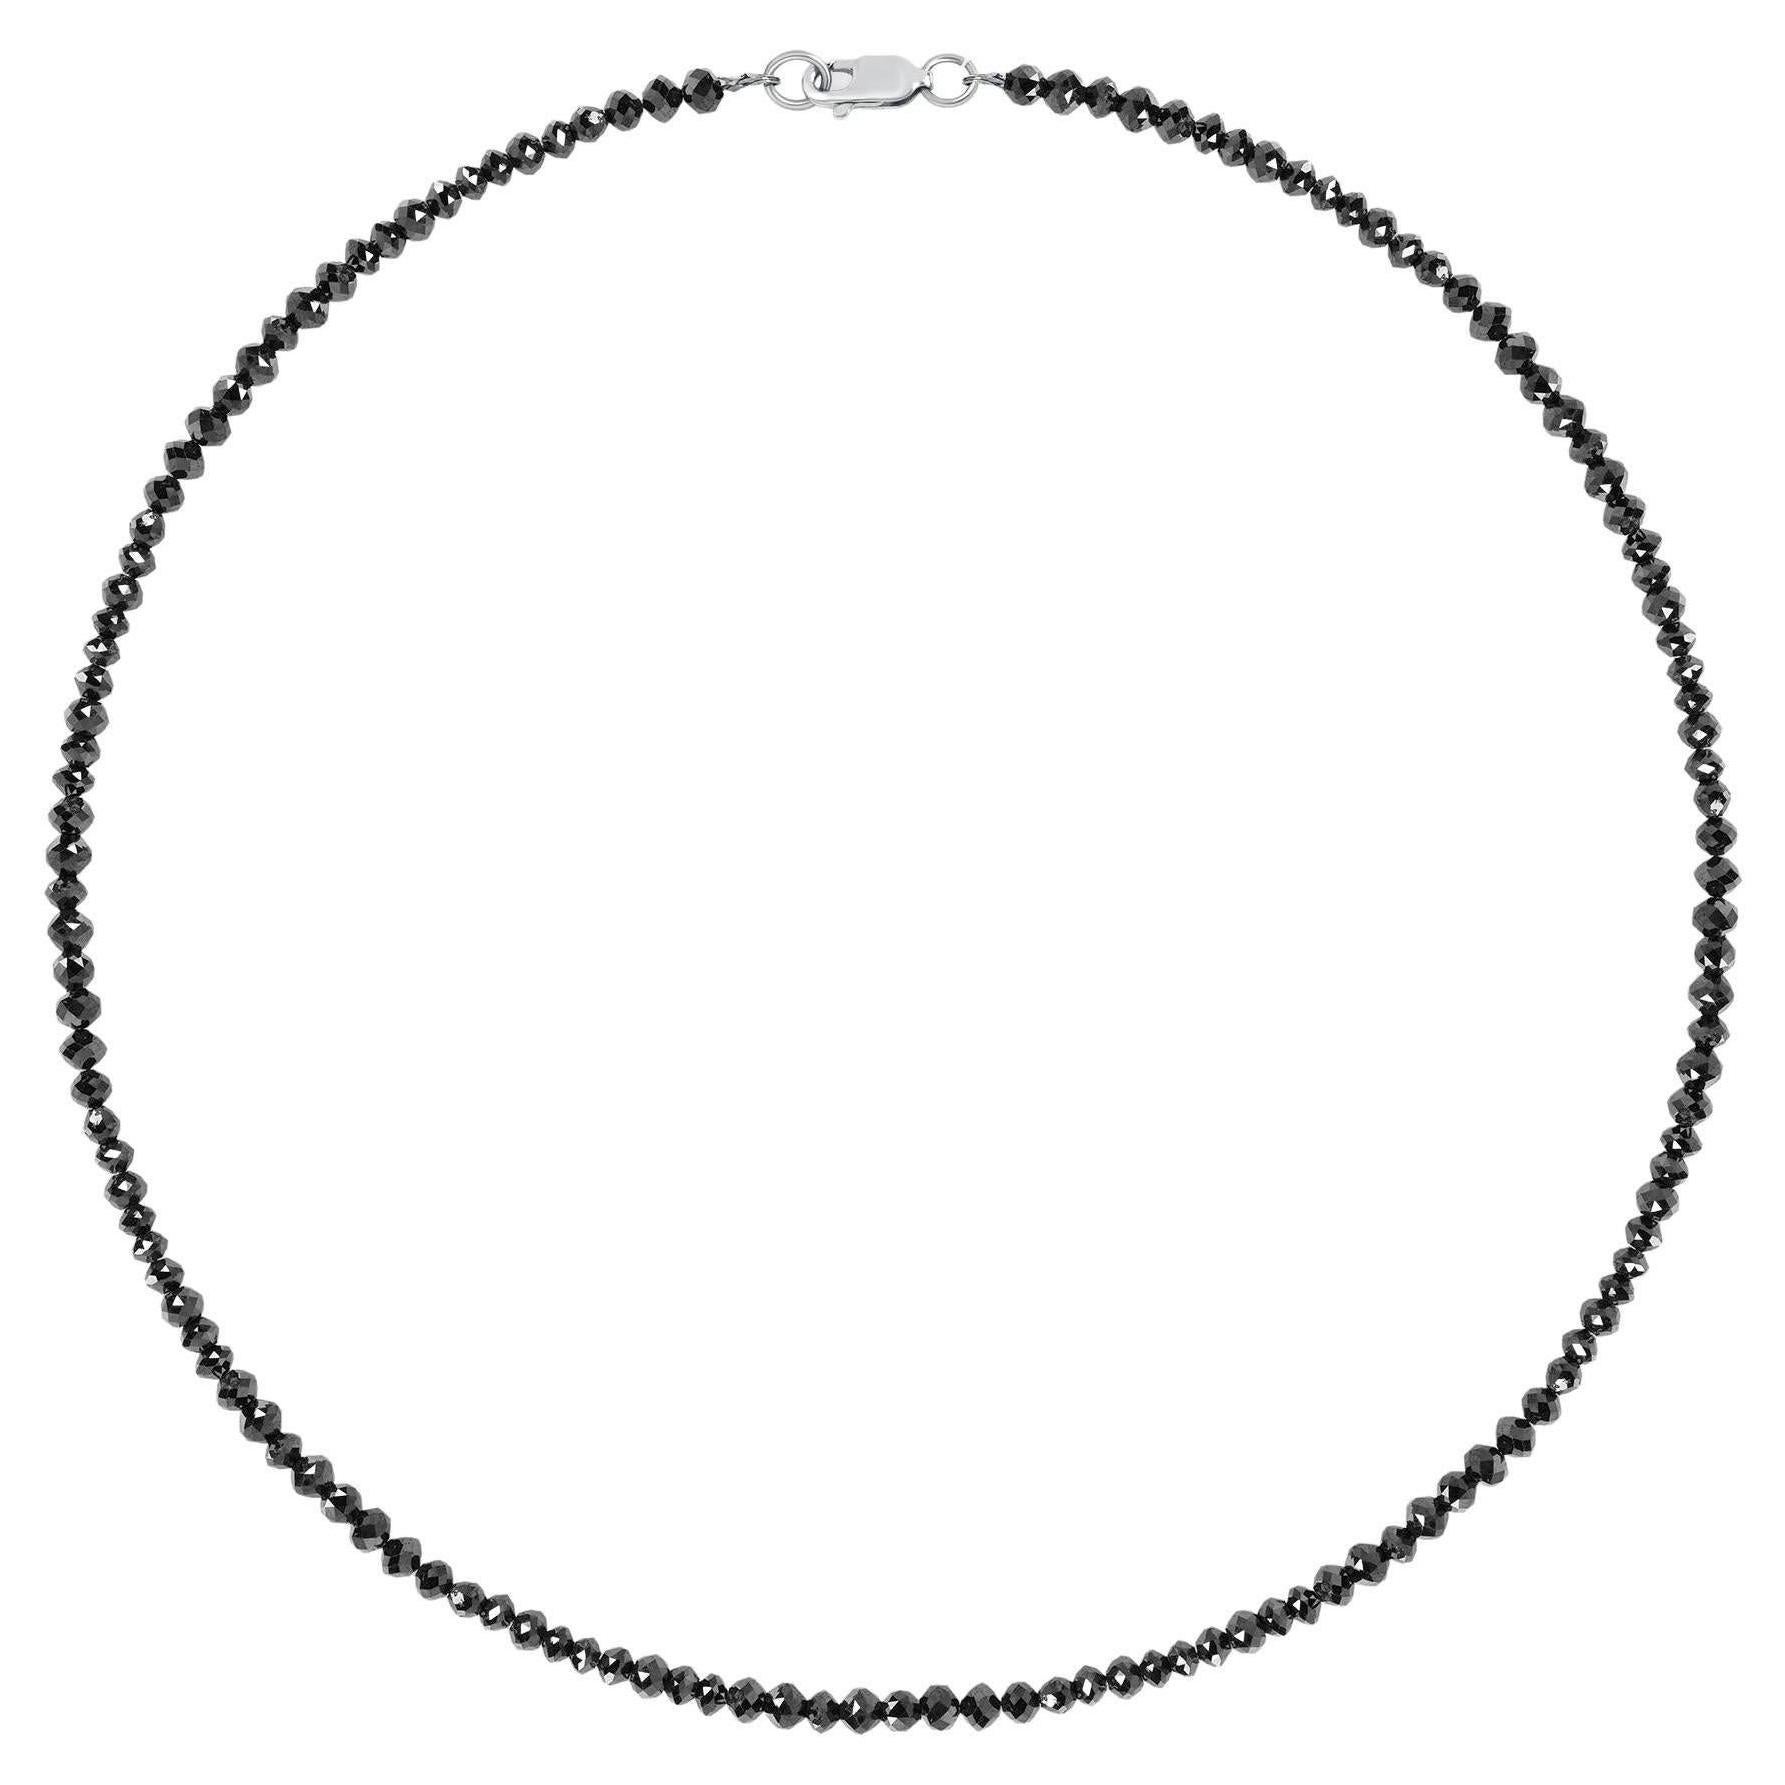 36.72 Carat Black Diamond Briolette Bead Necklace with 14K White Gold Clasp For Sale